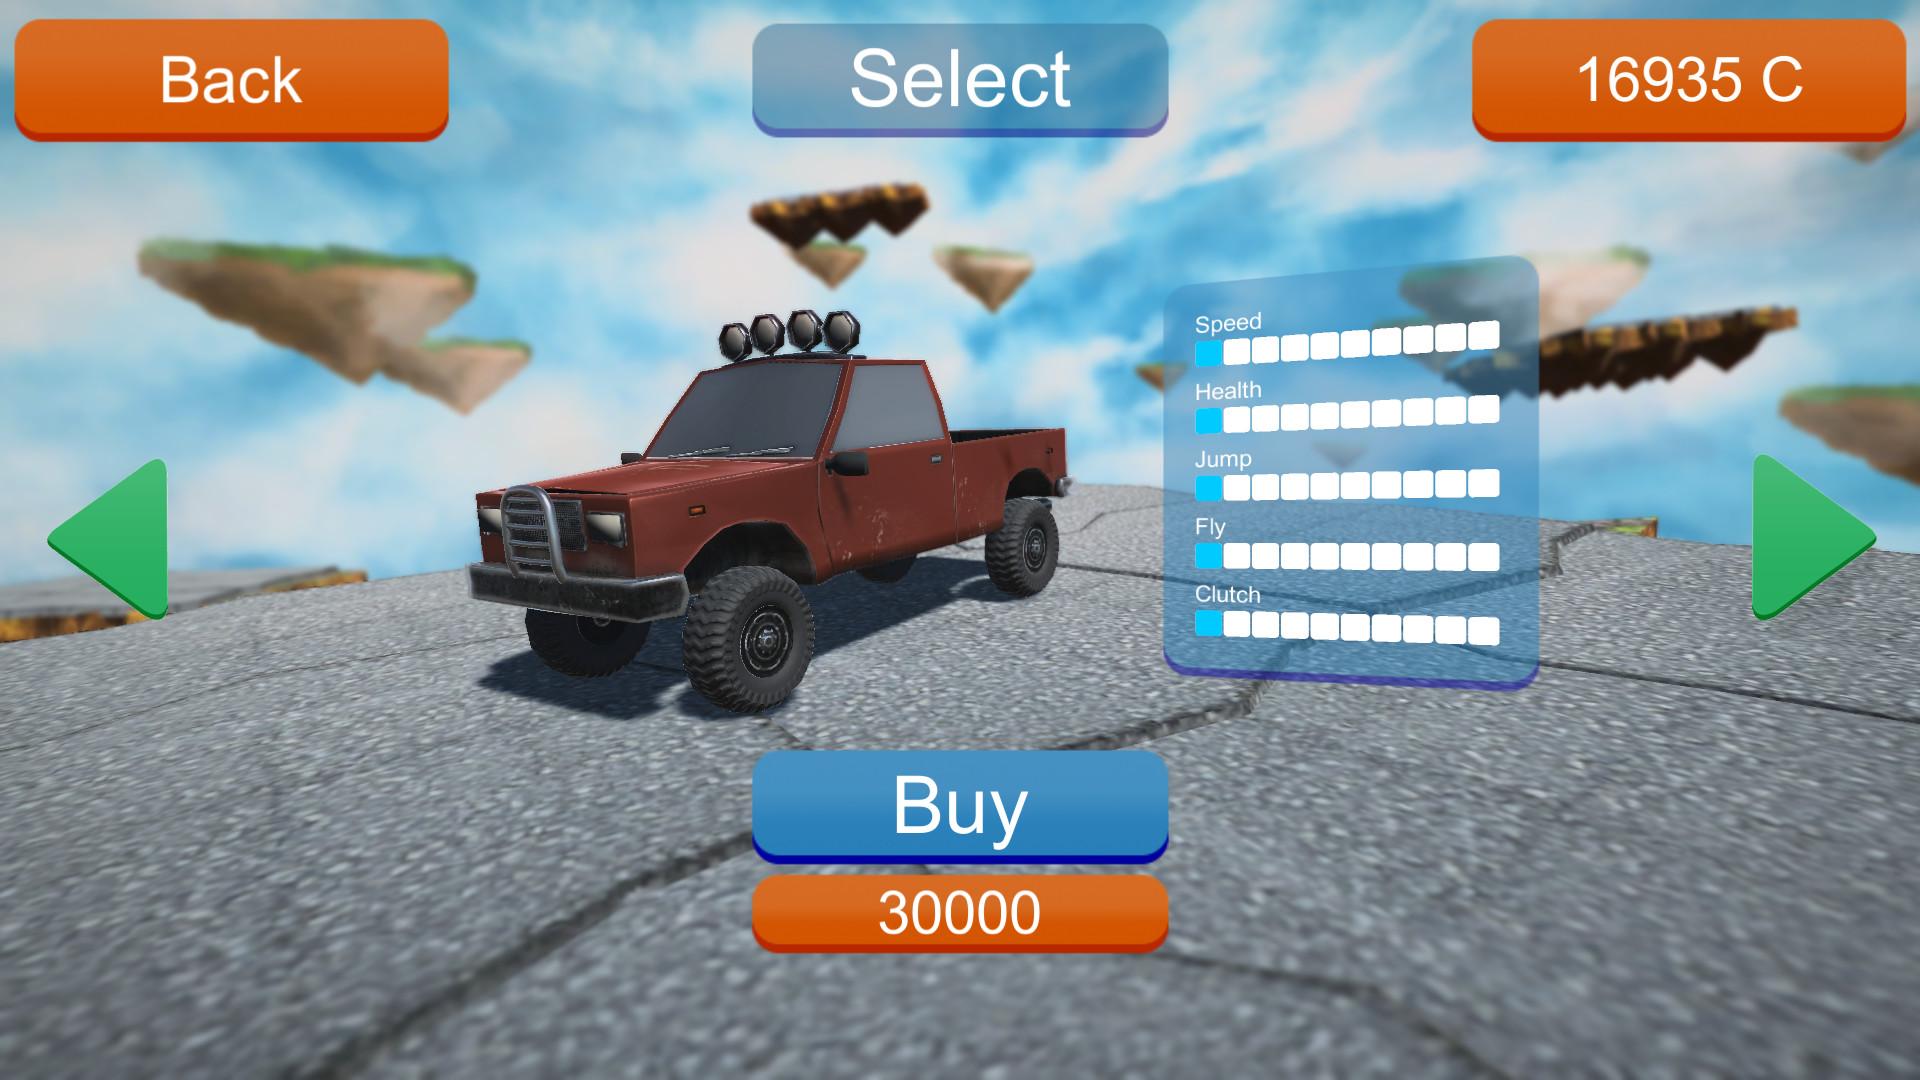 Screenshot №5 from game CrazyCars3D